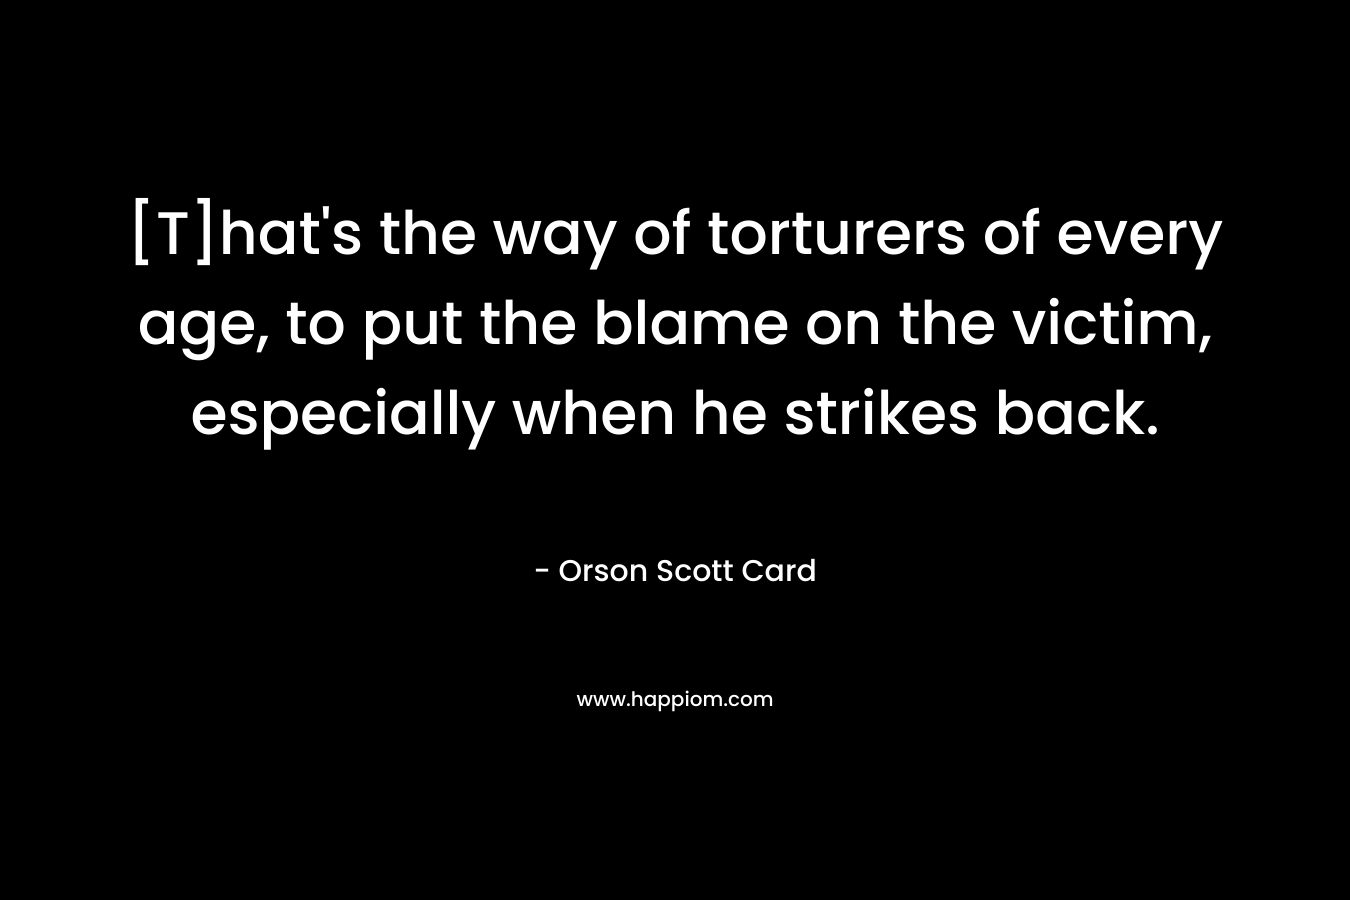 [T]hat’s the way of torturers of every age, to put the blame on the victim, especially when he strikes back. – Orson Scott Card